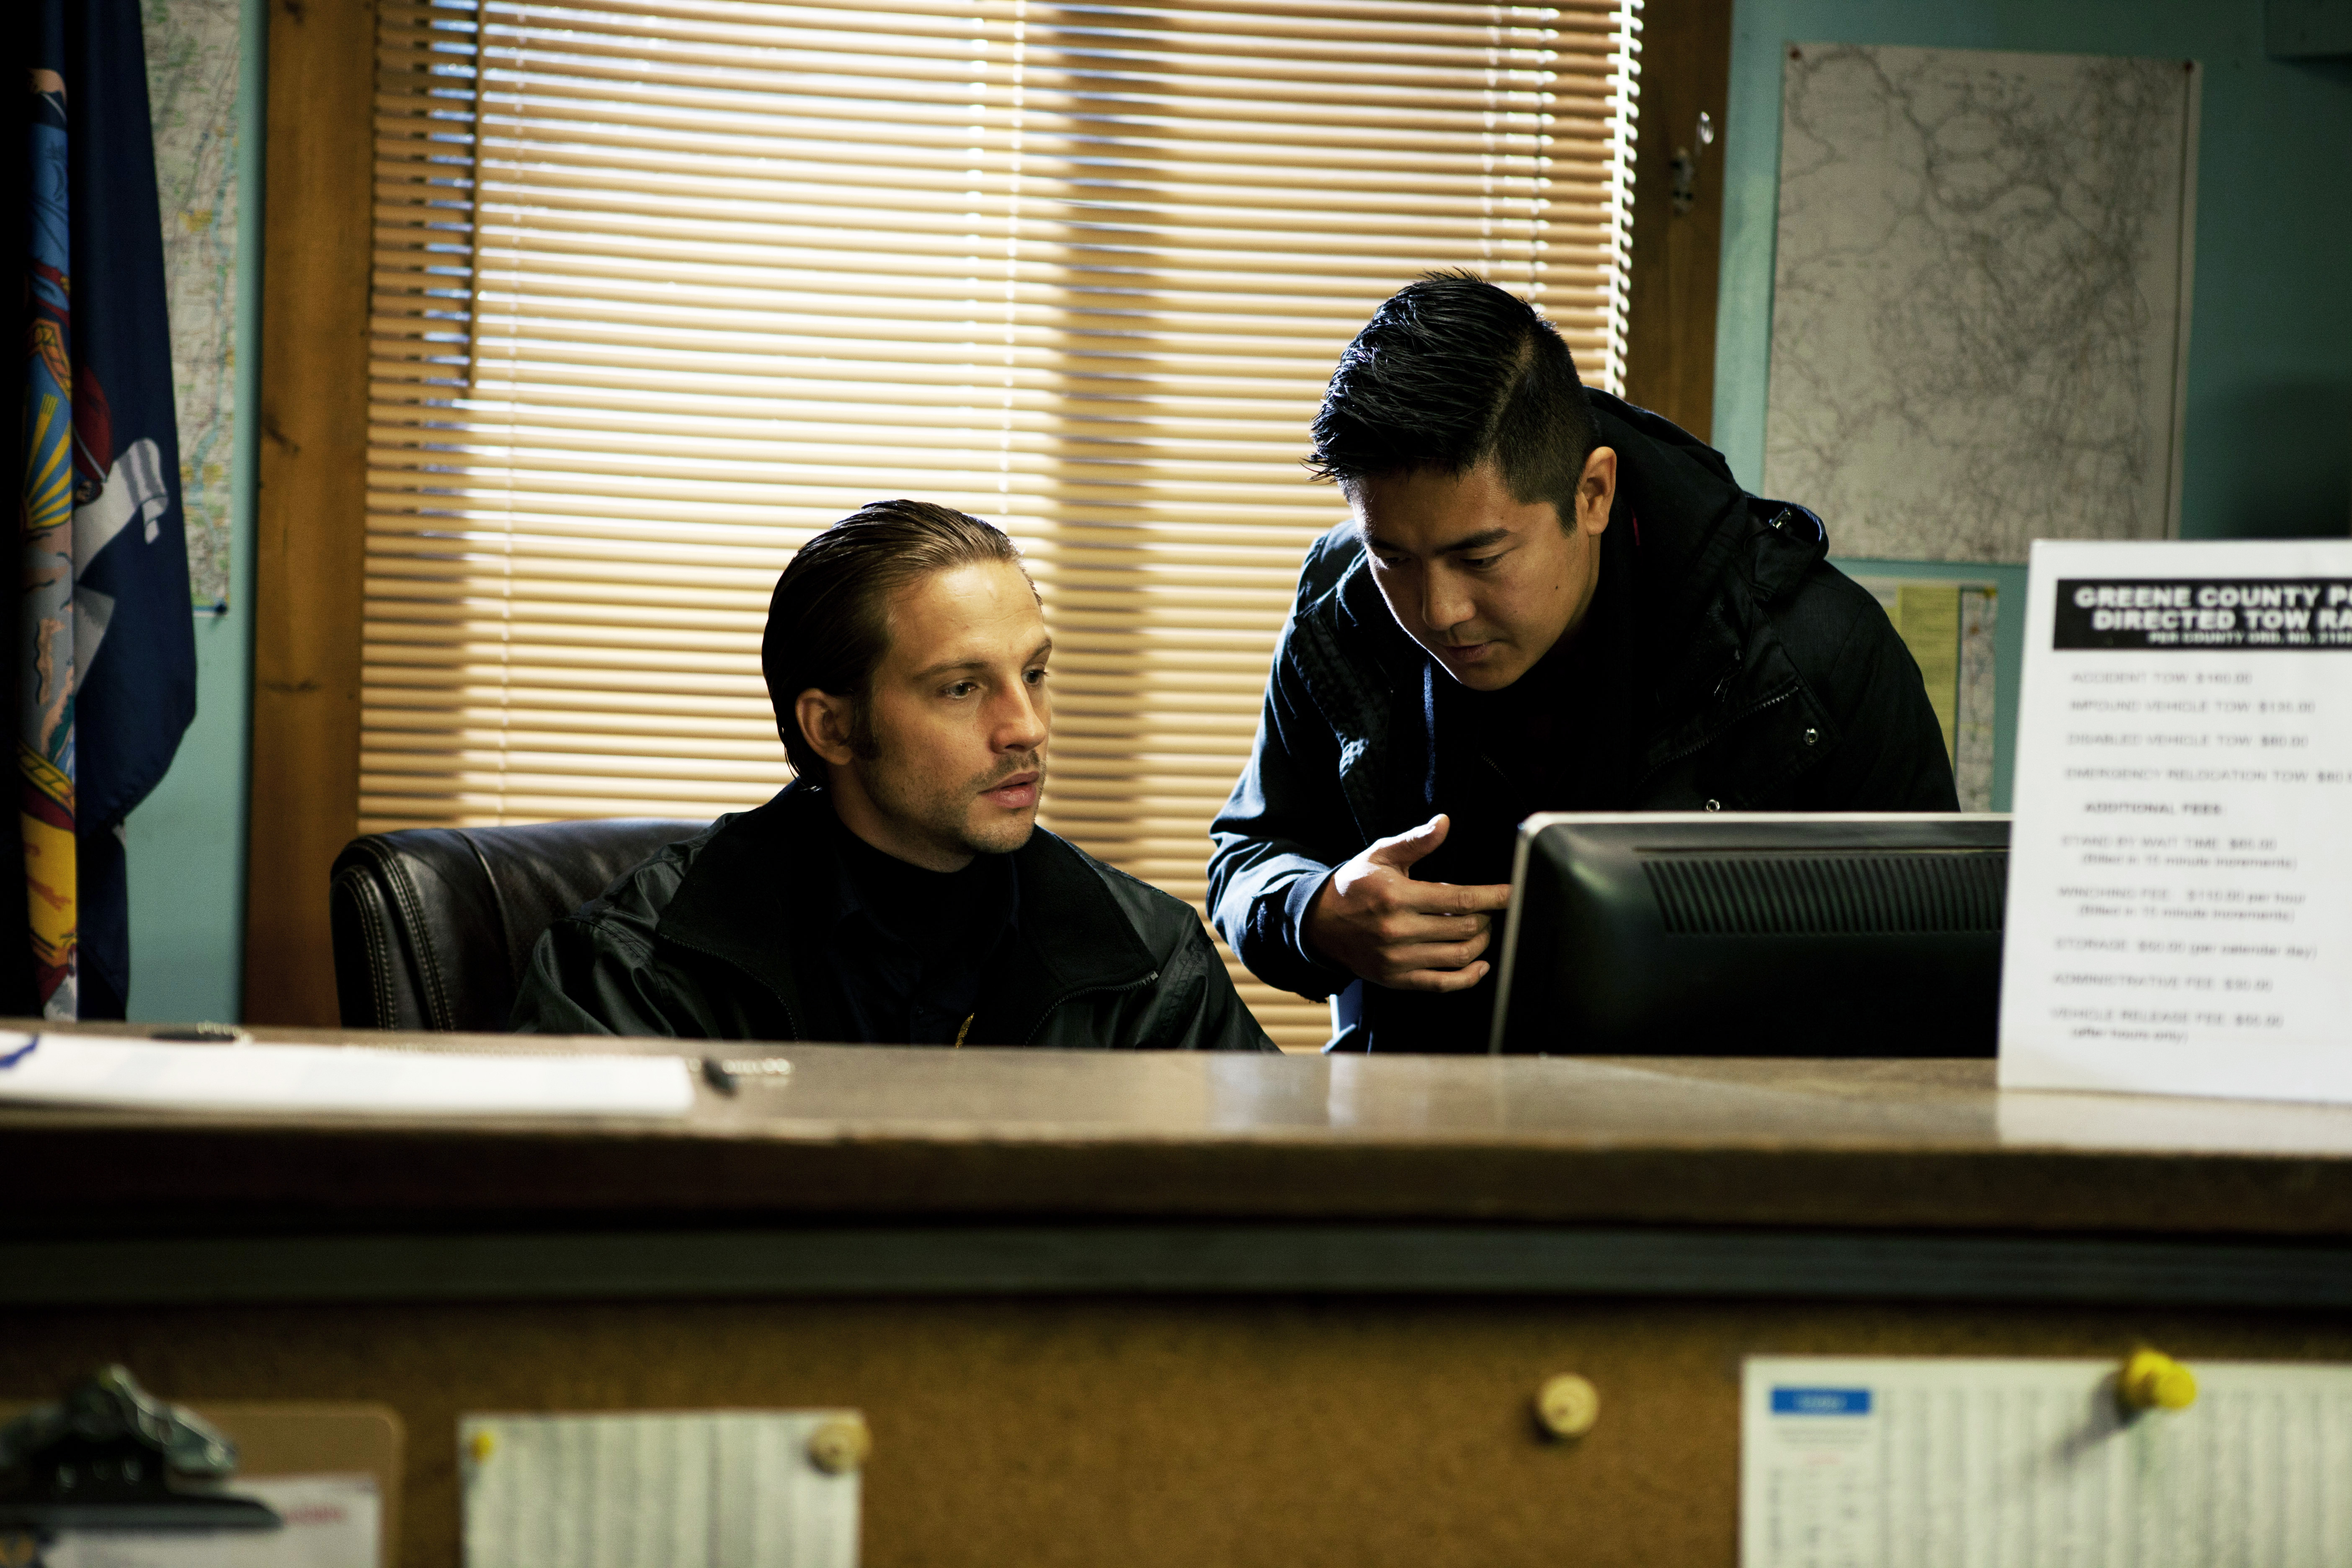 Tze Chun and Logan Marshall Green on the set of Cold Comes the Night